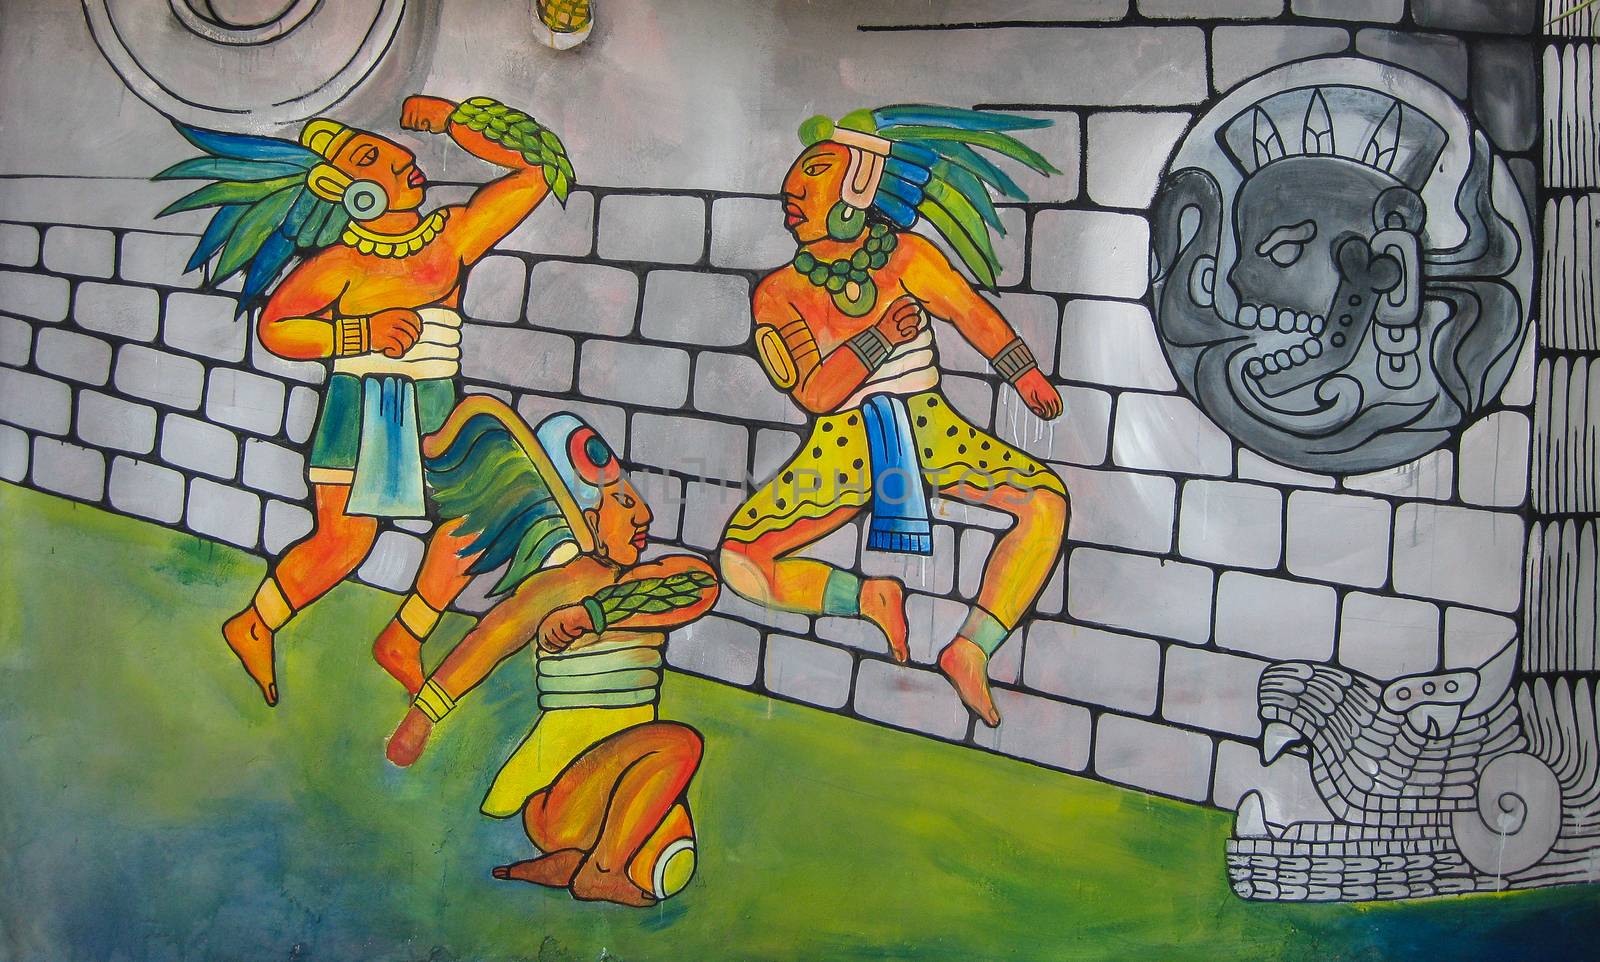 Mayan Ball Game Mural, Cancun, Mexico-Photo taken on: June 30th, 2008